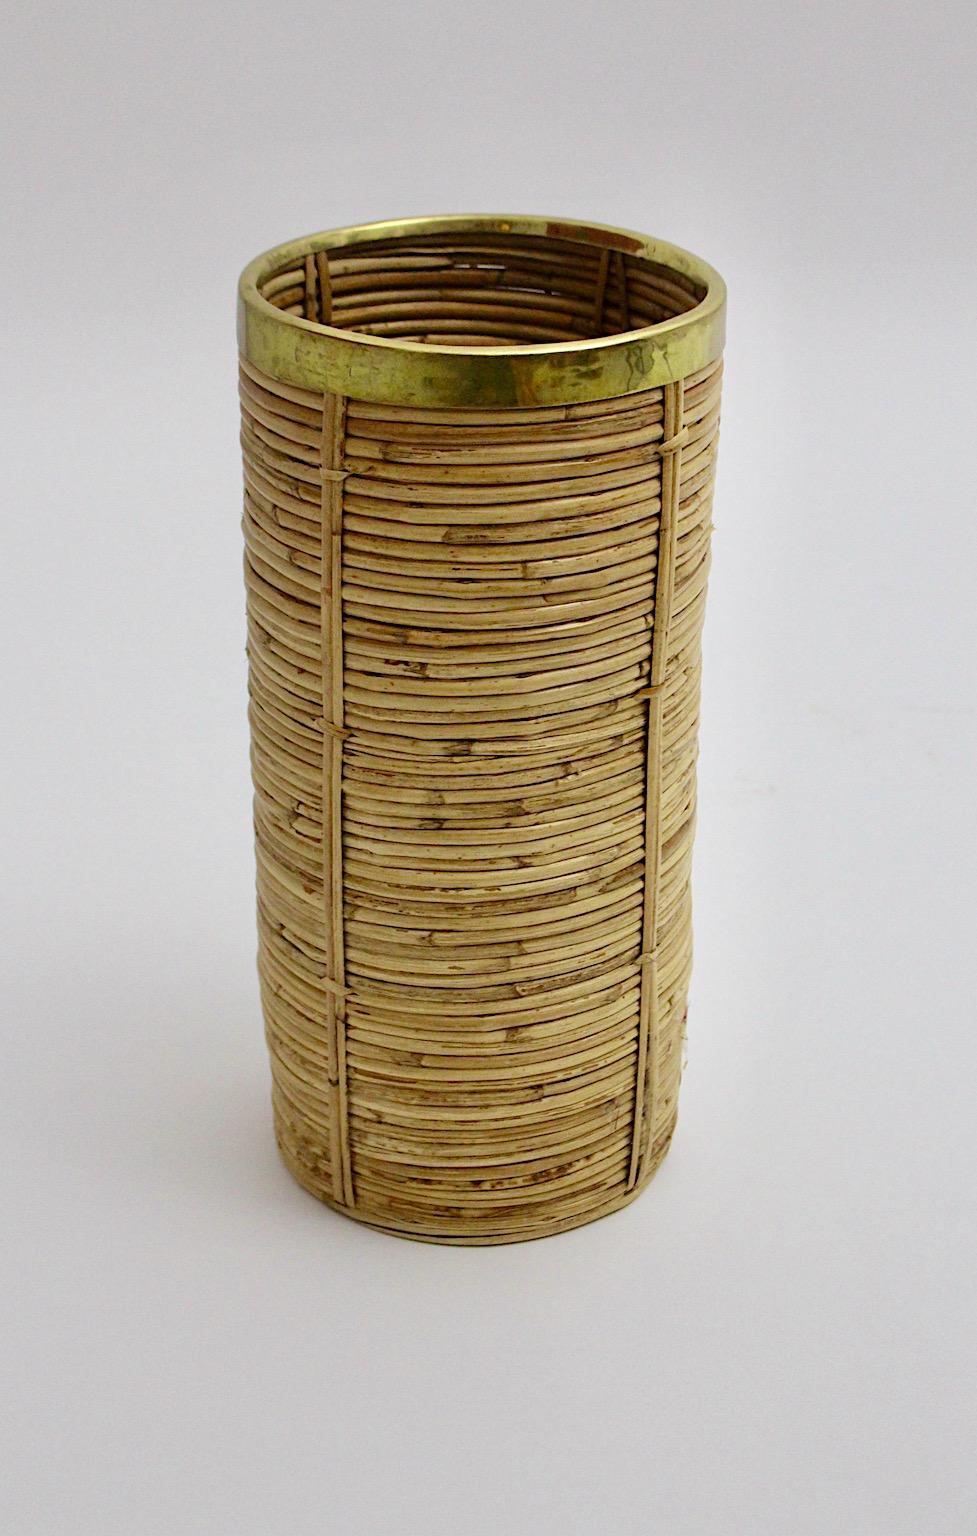 Riviera Style Organic Rattan Brass Paper Basket or Cane Holder, 1970s, Italy In Good Condition For Sale In Vienna, AT